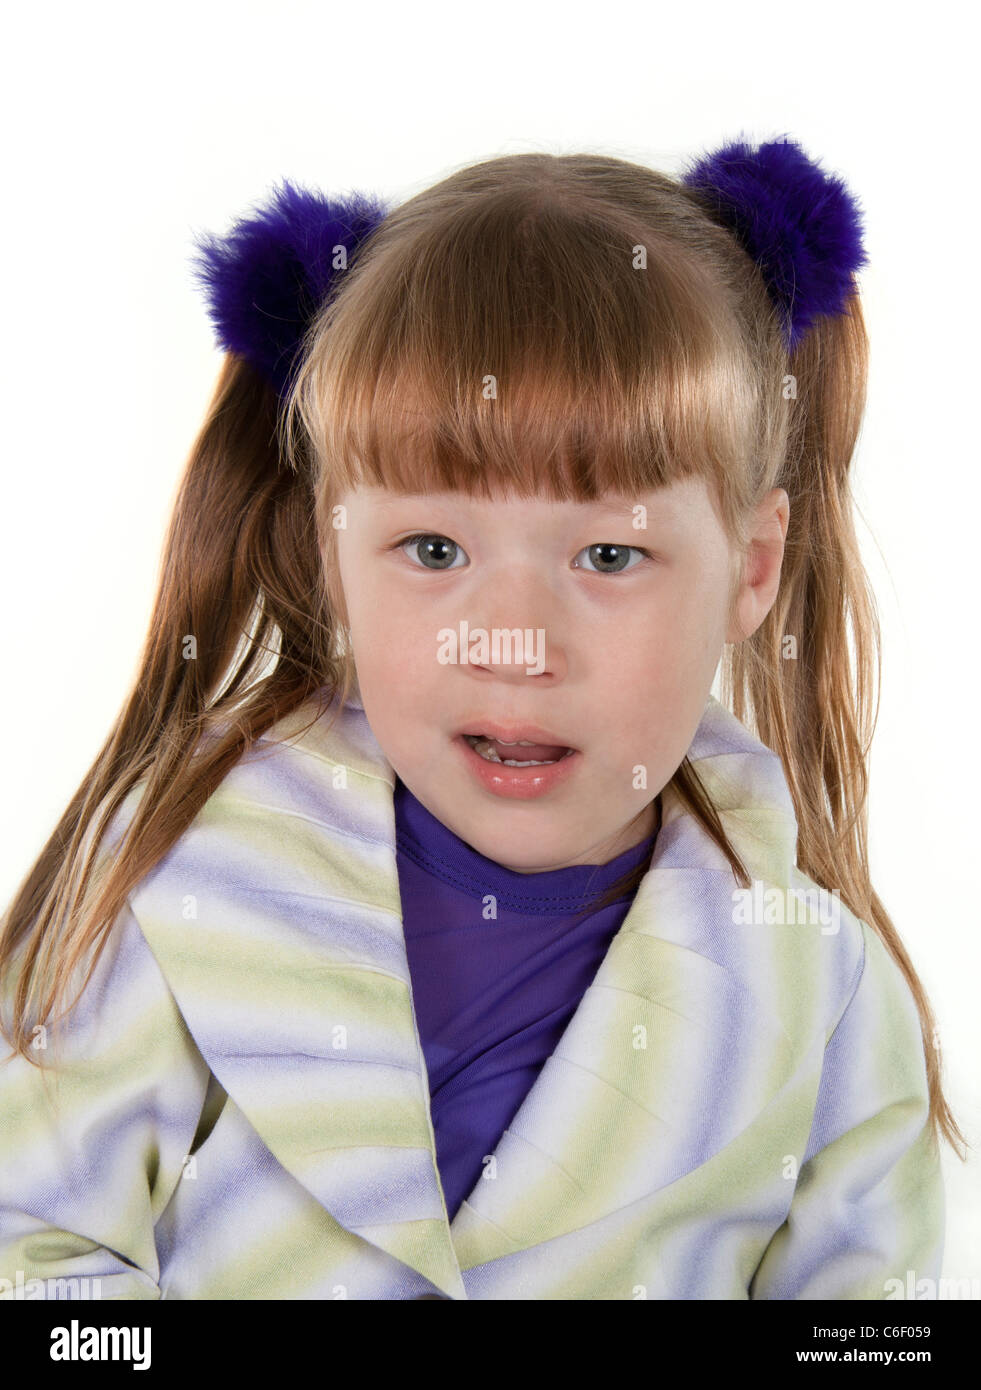 Portrait of the cheerful little girl on a white background Stock Photo